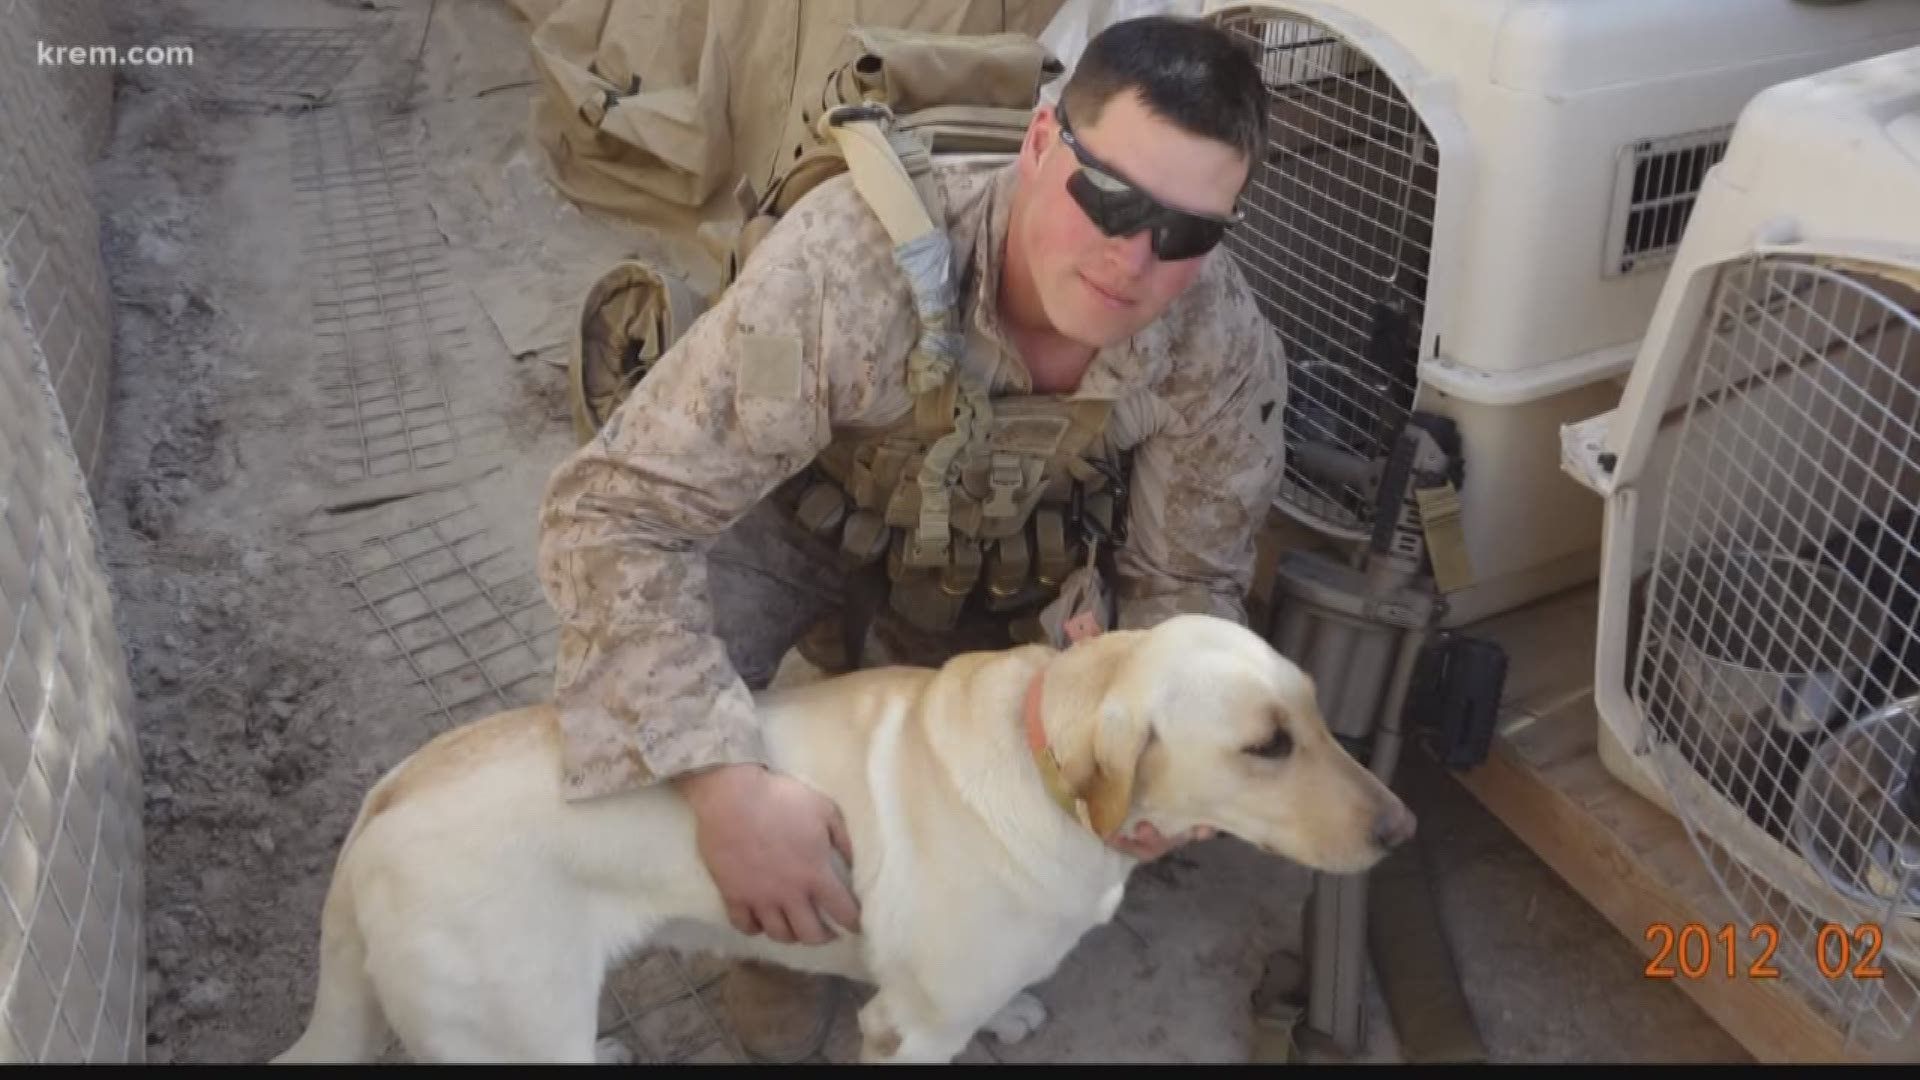 Seven years ago, a local marine served alongside Mally - a bomb-sniffing dog - in Afghanistan. Mally looked after her handler, Nick Montez, and Montez looked out for her.